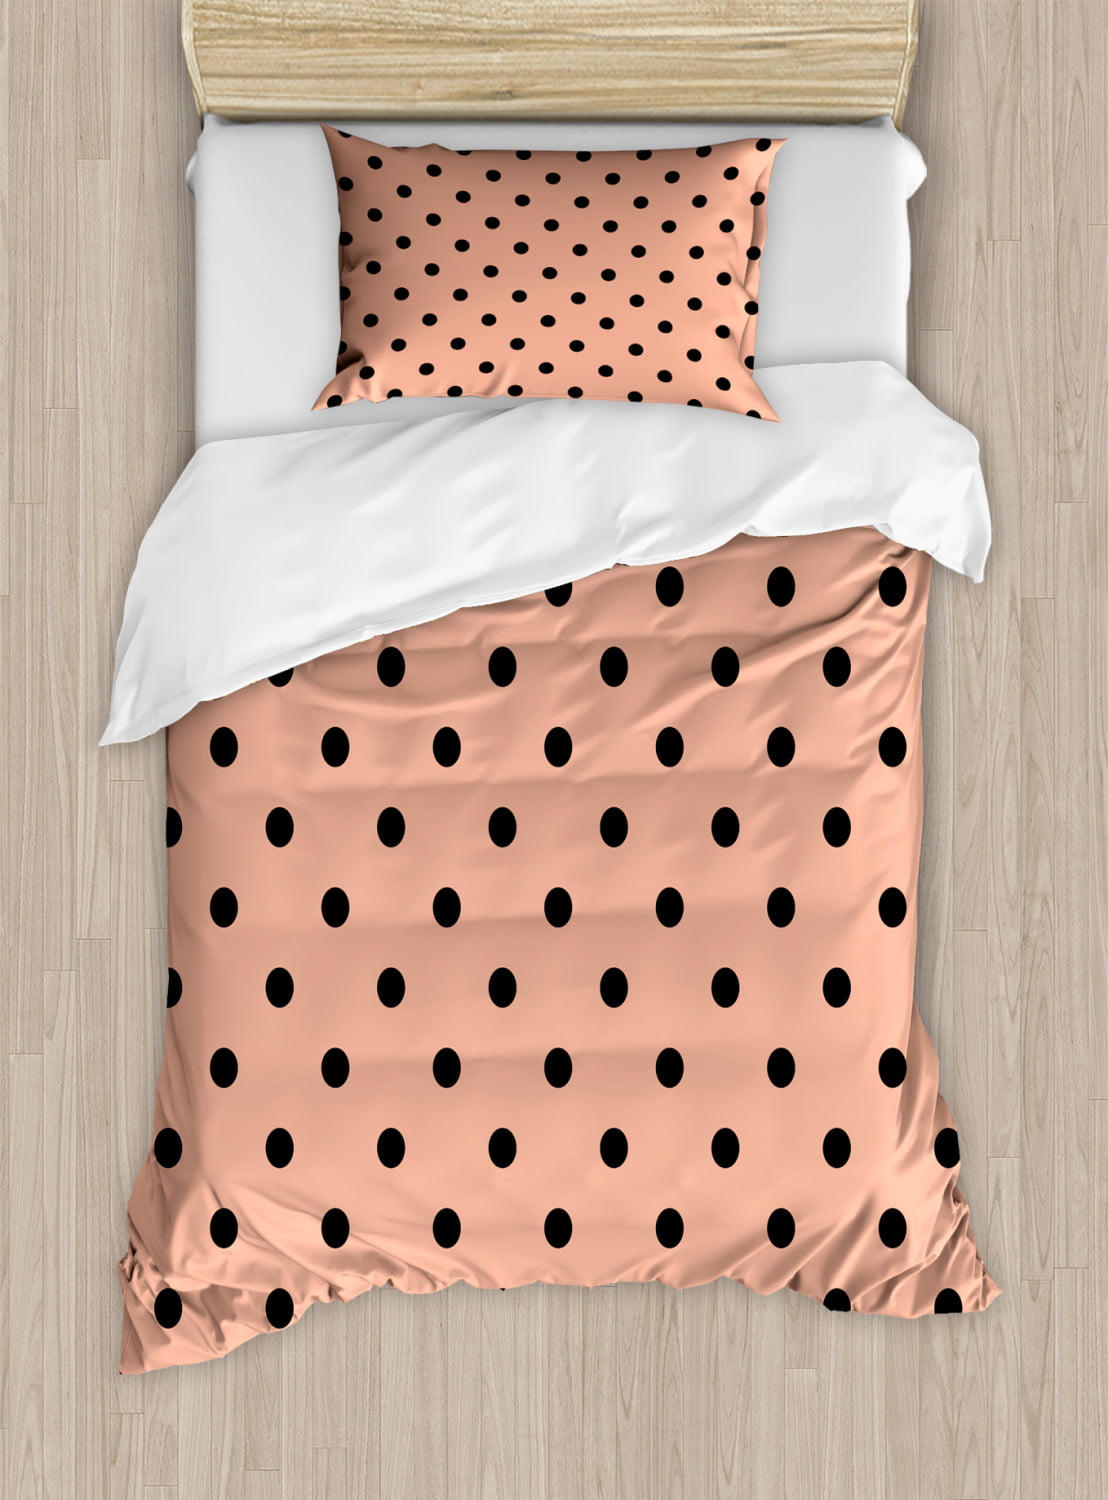 Peach Twin Size Duvet Cover Set Traditional Black Polka Dots On